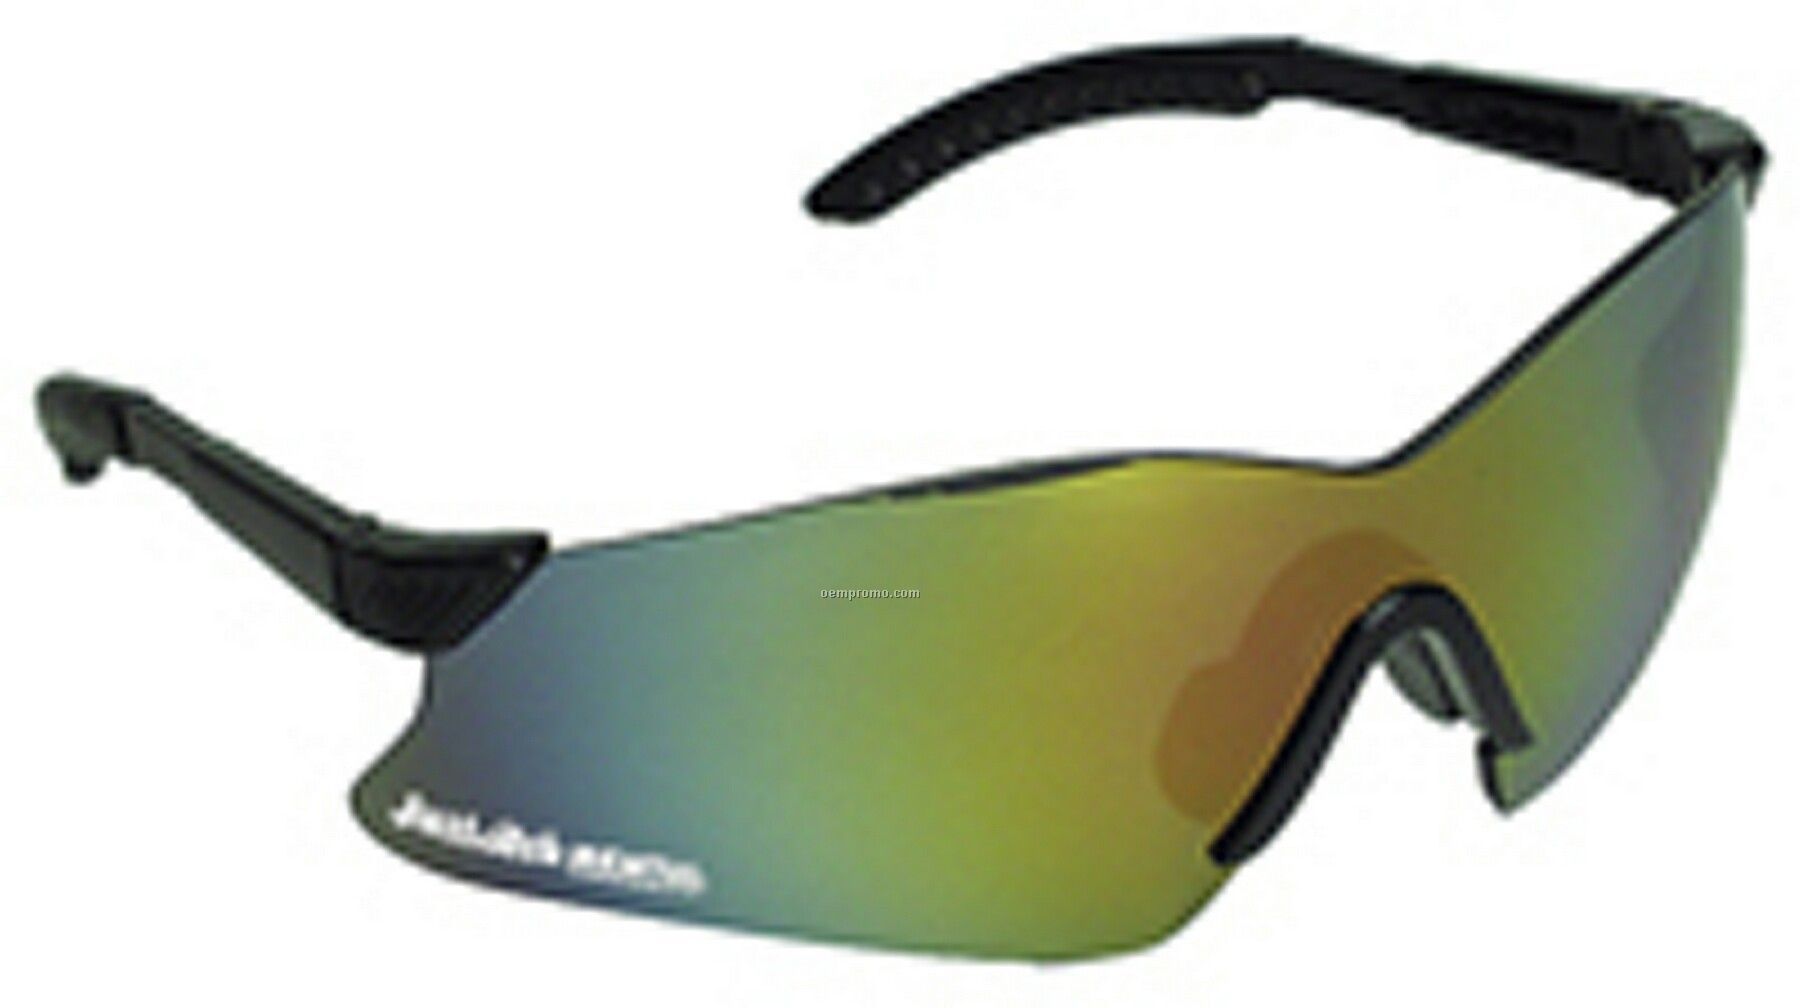 Hawk Safety Glasses W/ Mirrored Lenses